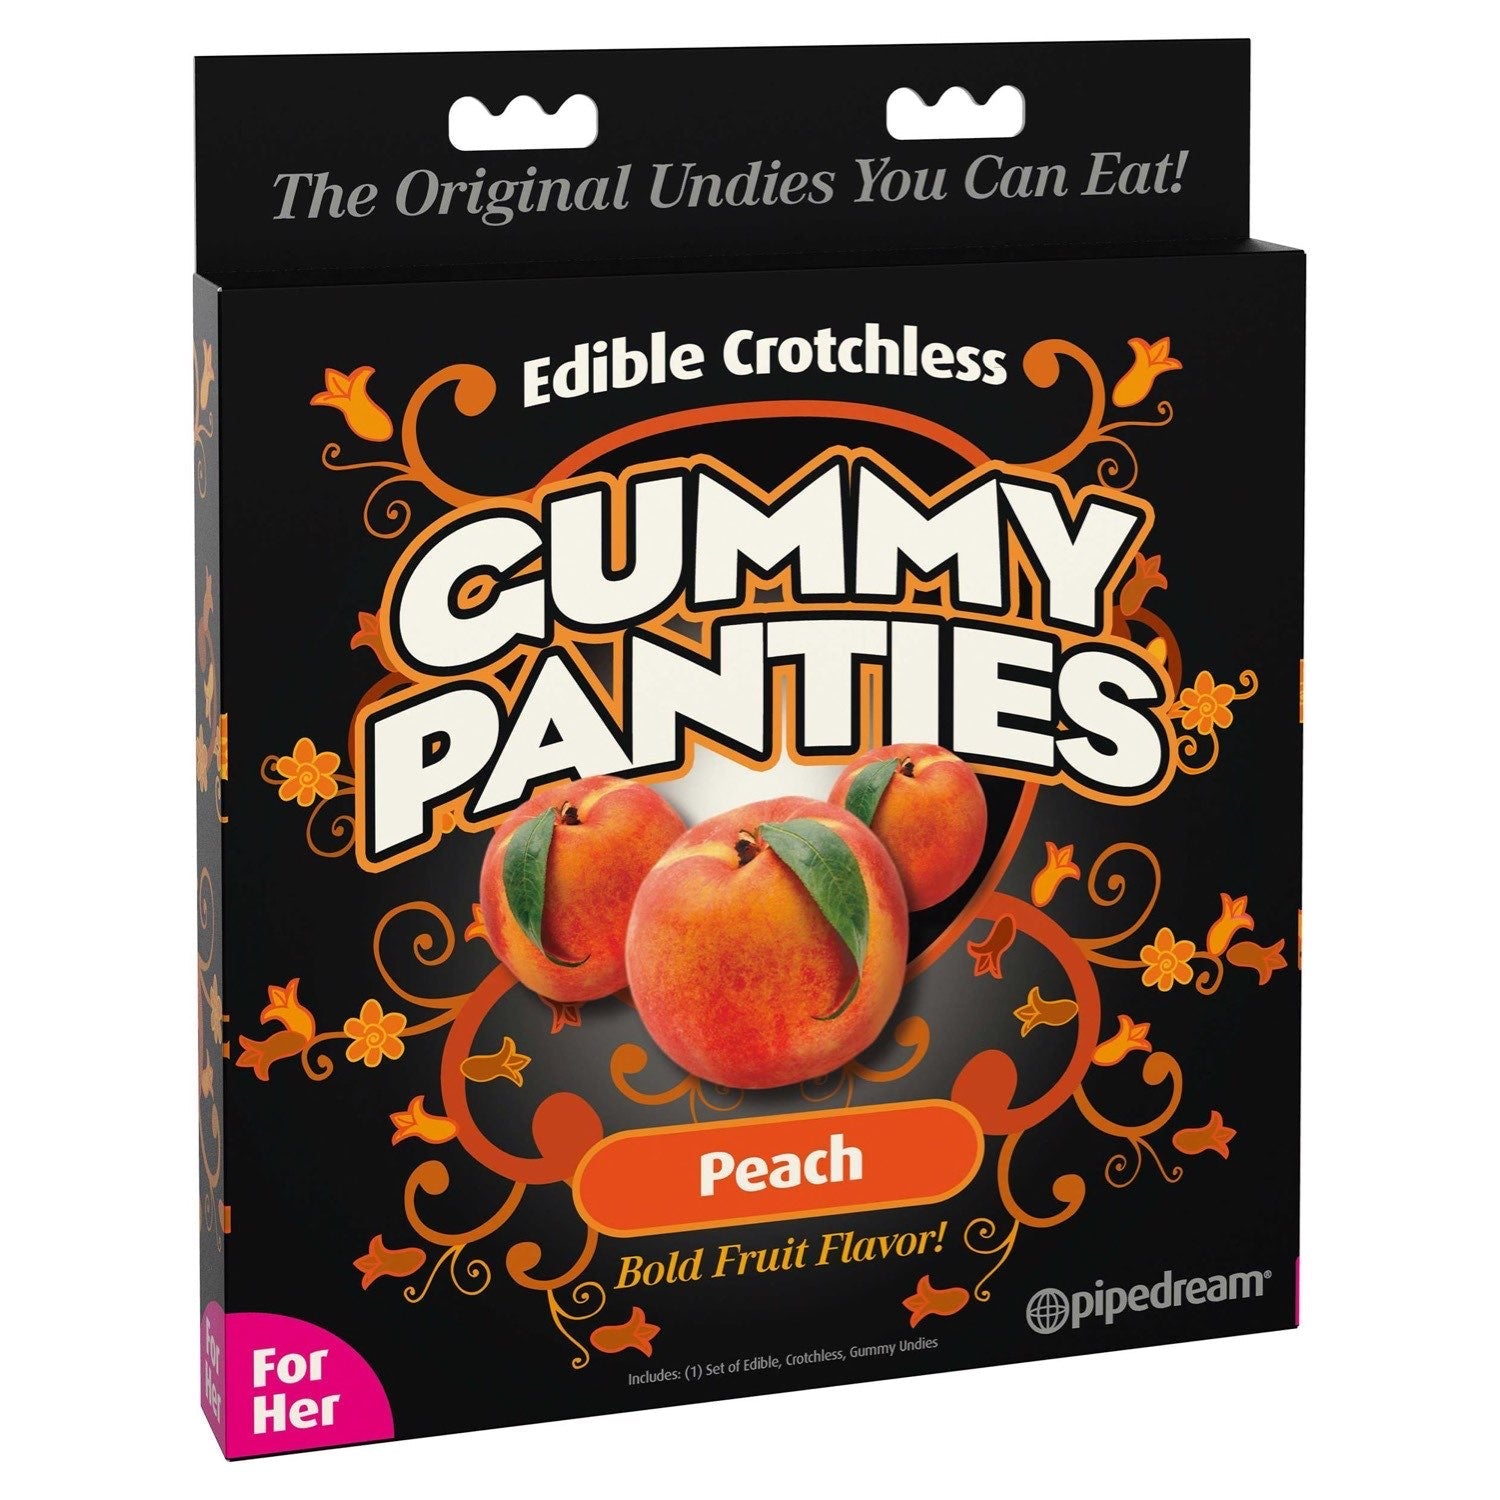  Gummy Panties - Peach Flavoured Edible Crotchless Panties by Pipedream